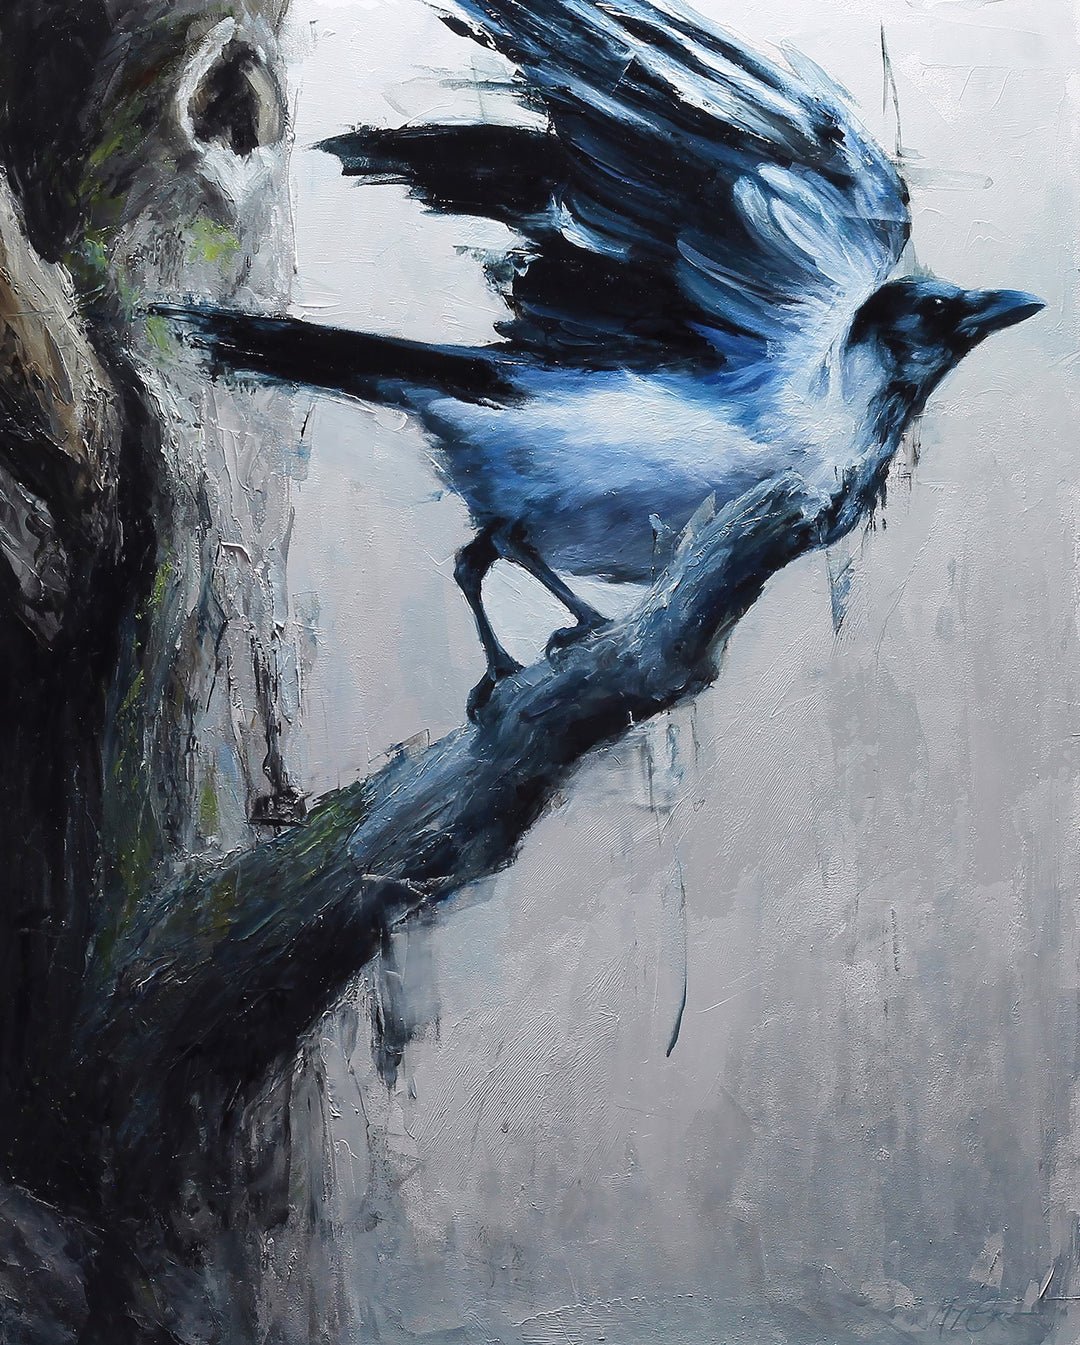 A painting by artist Morgan Cameron depicting a blue bird perched on a branch amidst "Mist and Shadow, 2022" by Morgan Cameron.